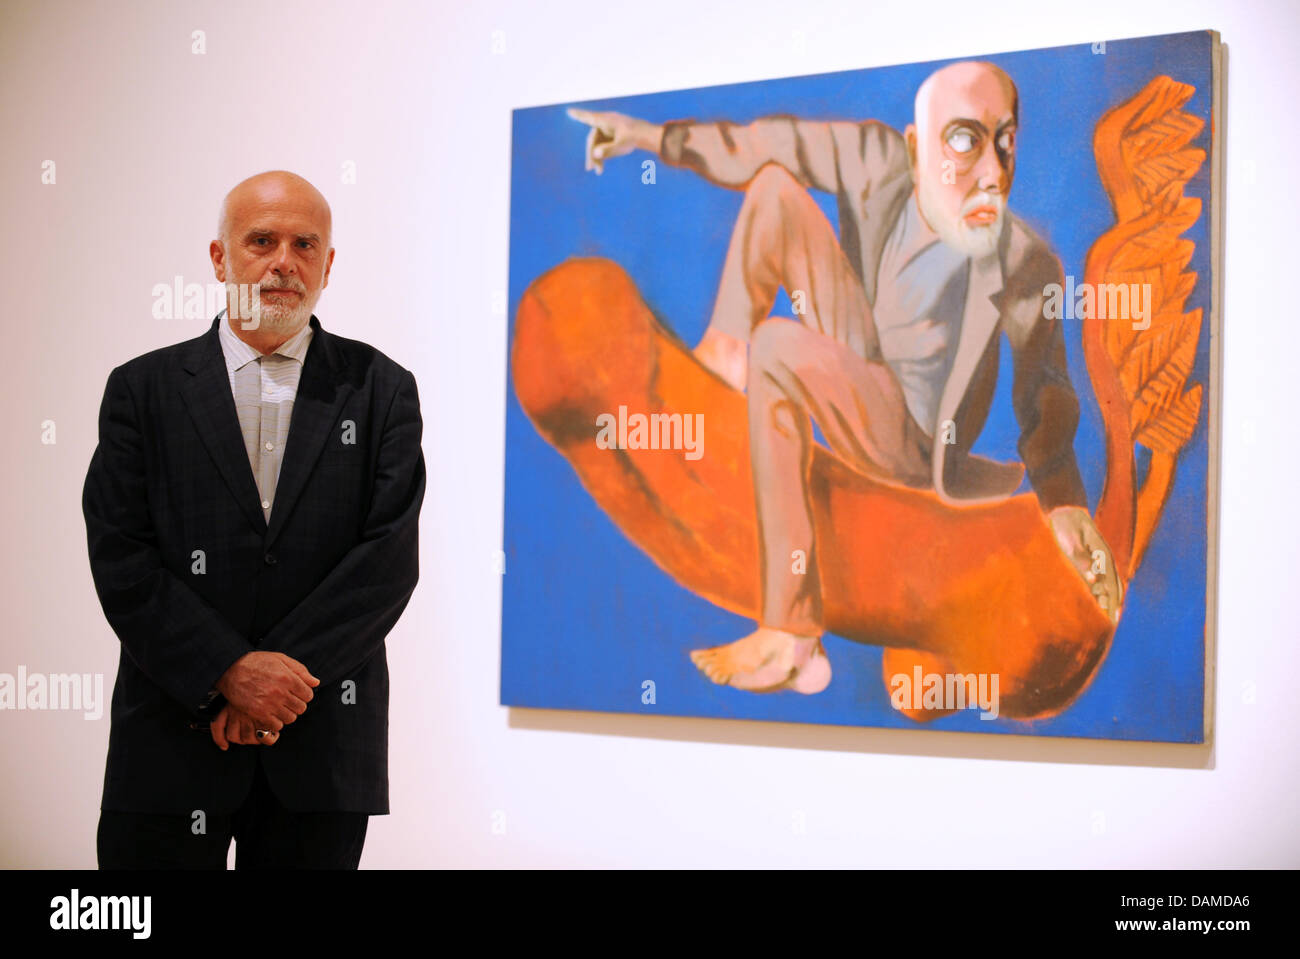 At the preview of the exhibiton 'Francesco Clemente. Palimpsest' the Italian painter Francesco Clemente, who is living in New York, stands in front of his work 'Self-portrait in an imperial era' (2005) inside the Art hall Schirn in Frankfurt/main, Germany, 7 June 2011.  The Schirn presents around 40 pieces from the years 1978 to 2011 from 8 June to 4 September 2011. The exhibition  Stock Photo